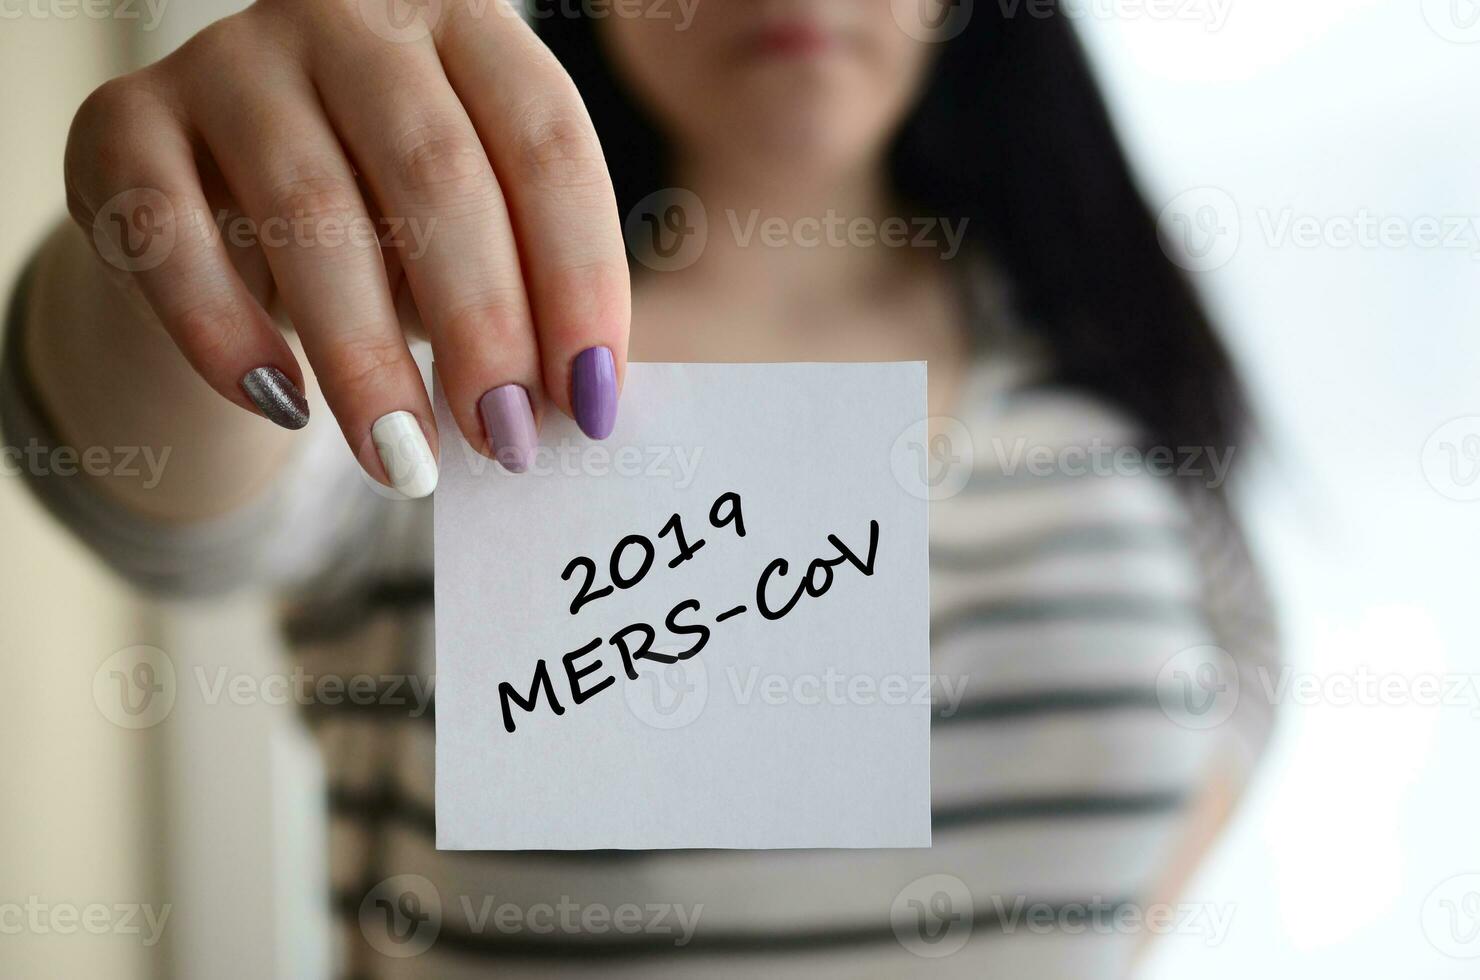 MERS-CoV Novel Corona virus inscription on paper in female hand. Middle East Respiratory Syndrome. Chinese infection photo